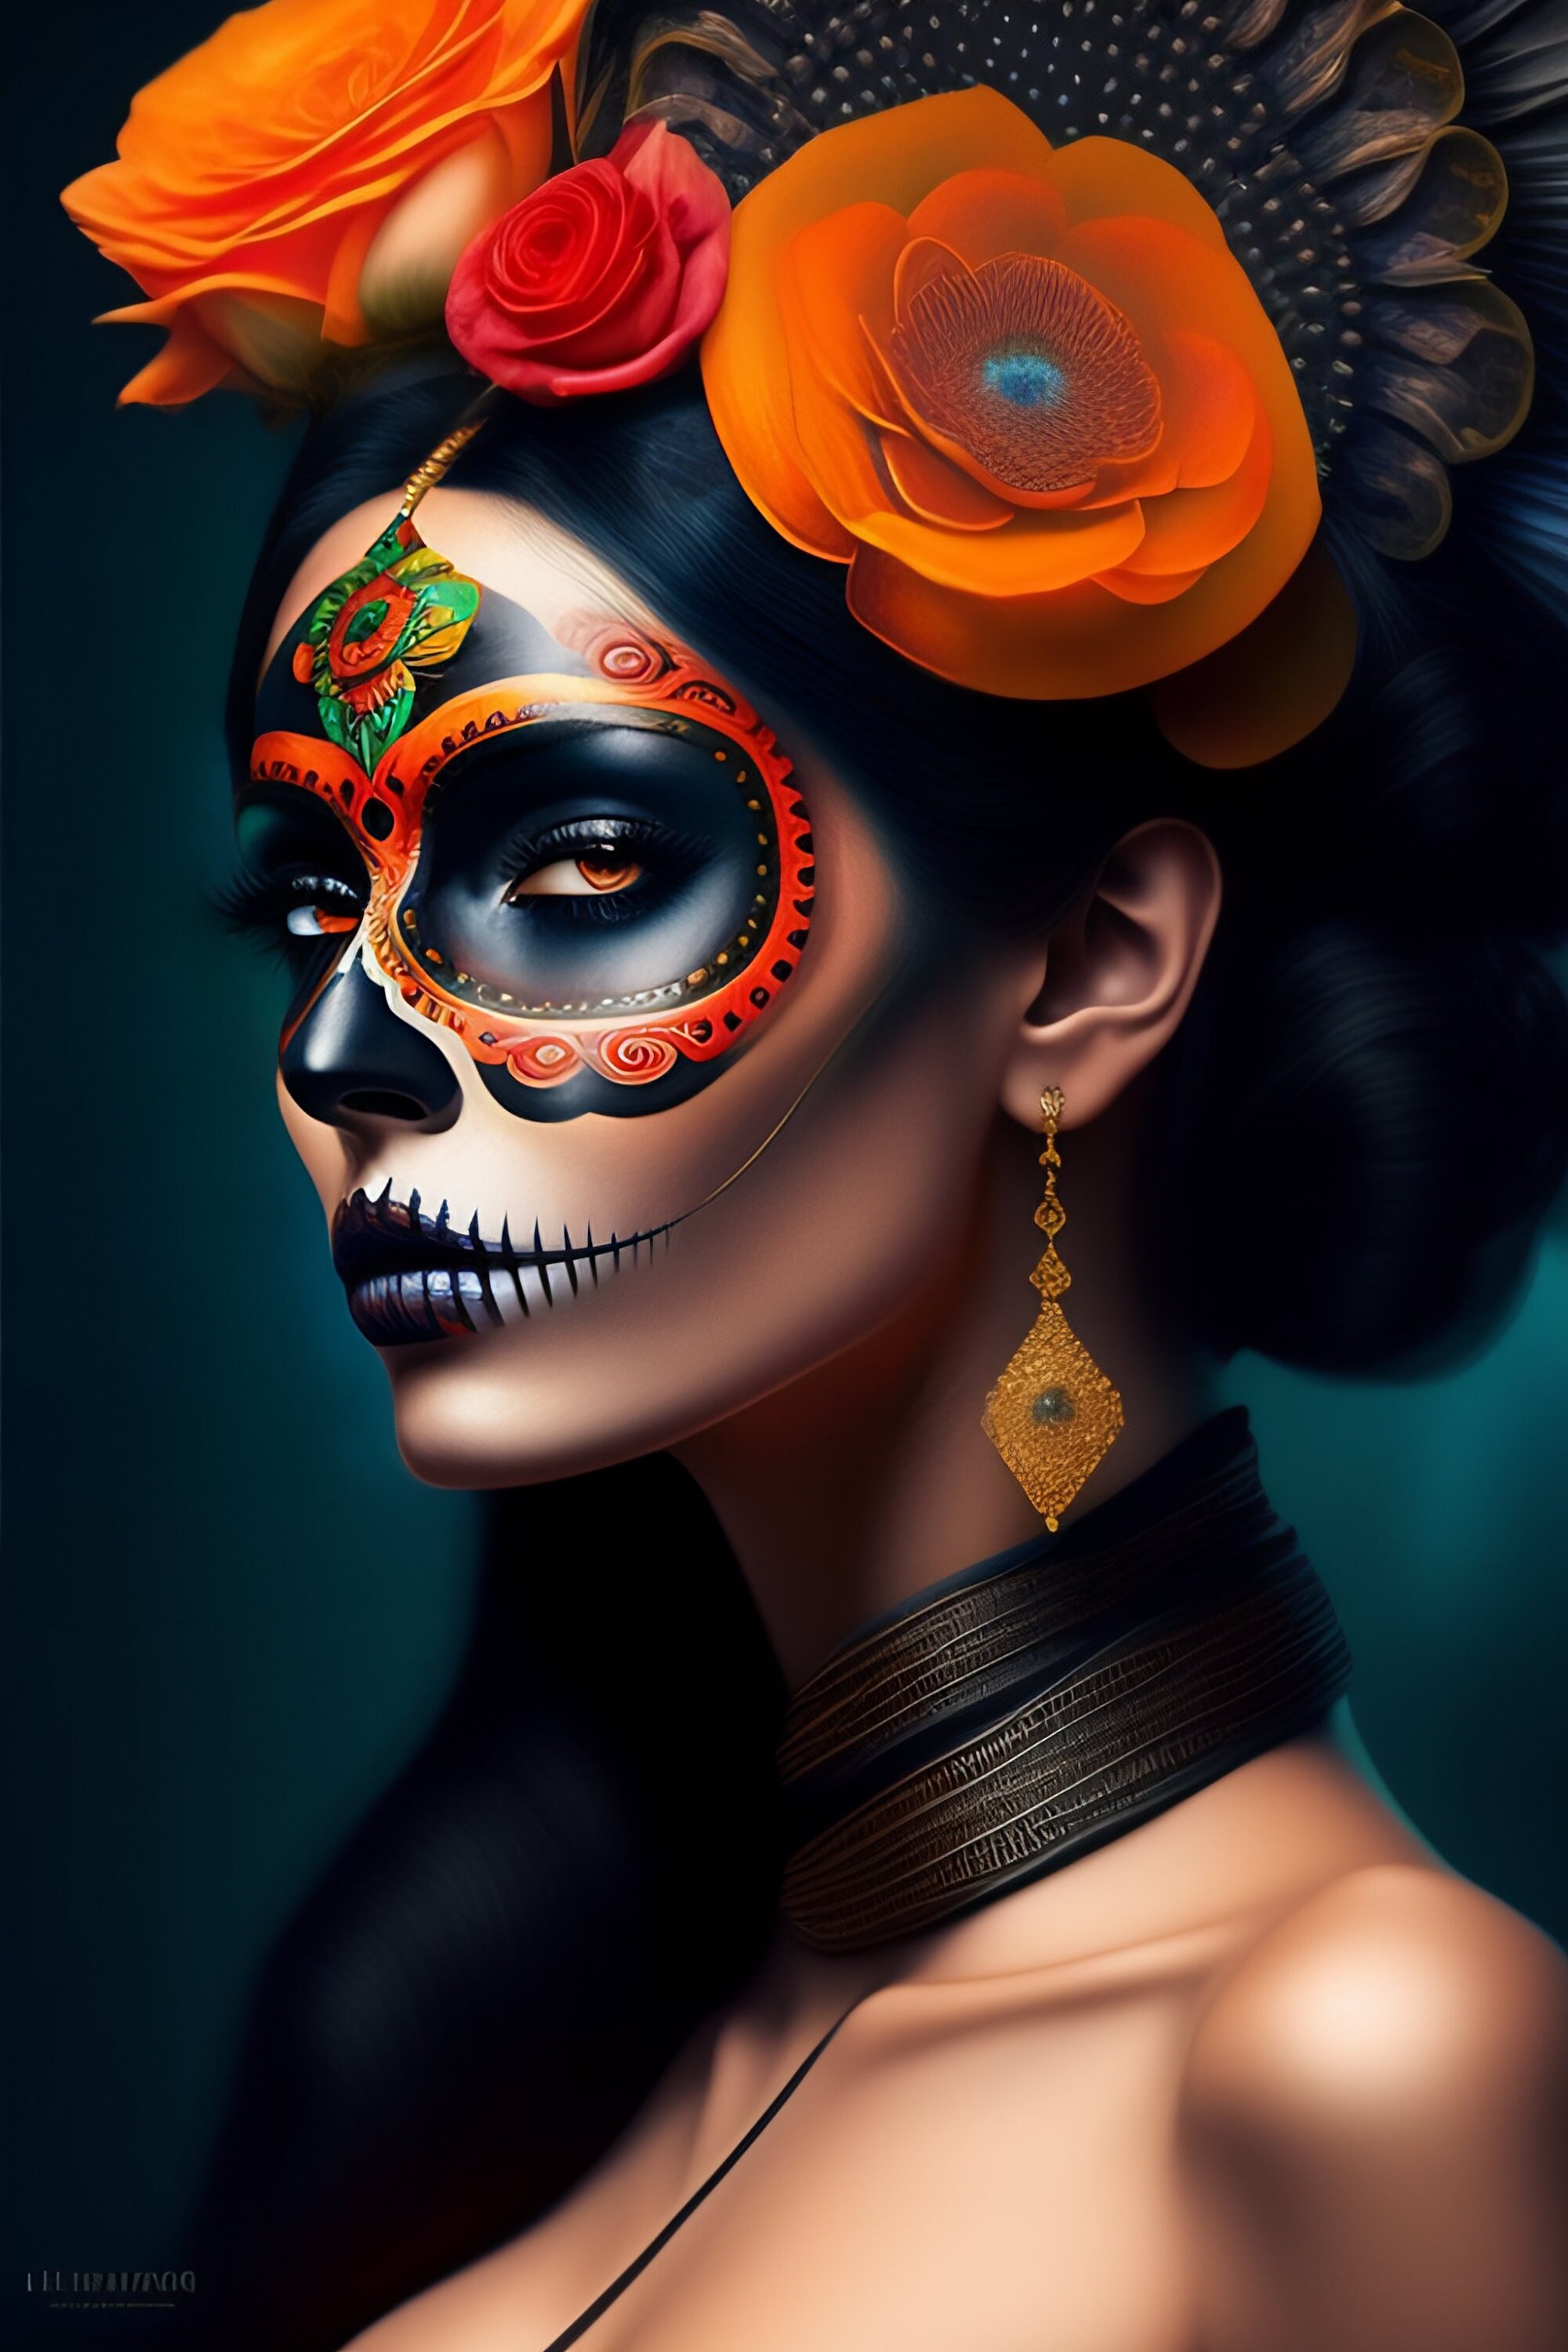 Sugar Skull Style Woman With Flowers on Her Hair Wall Art Vivid Color ...